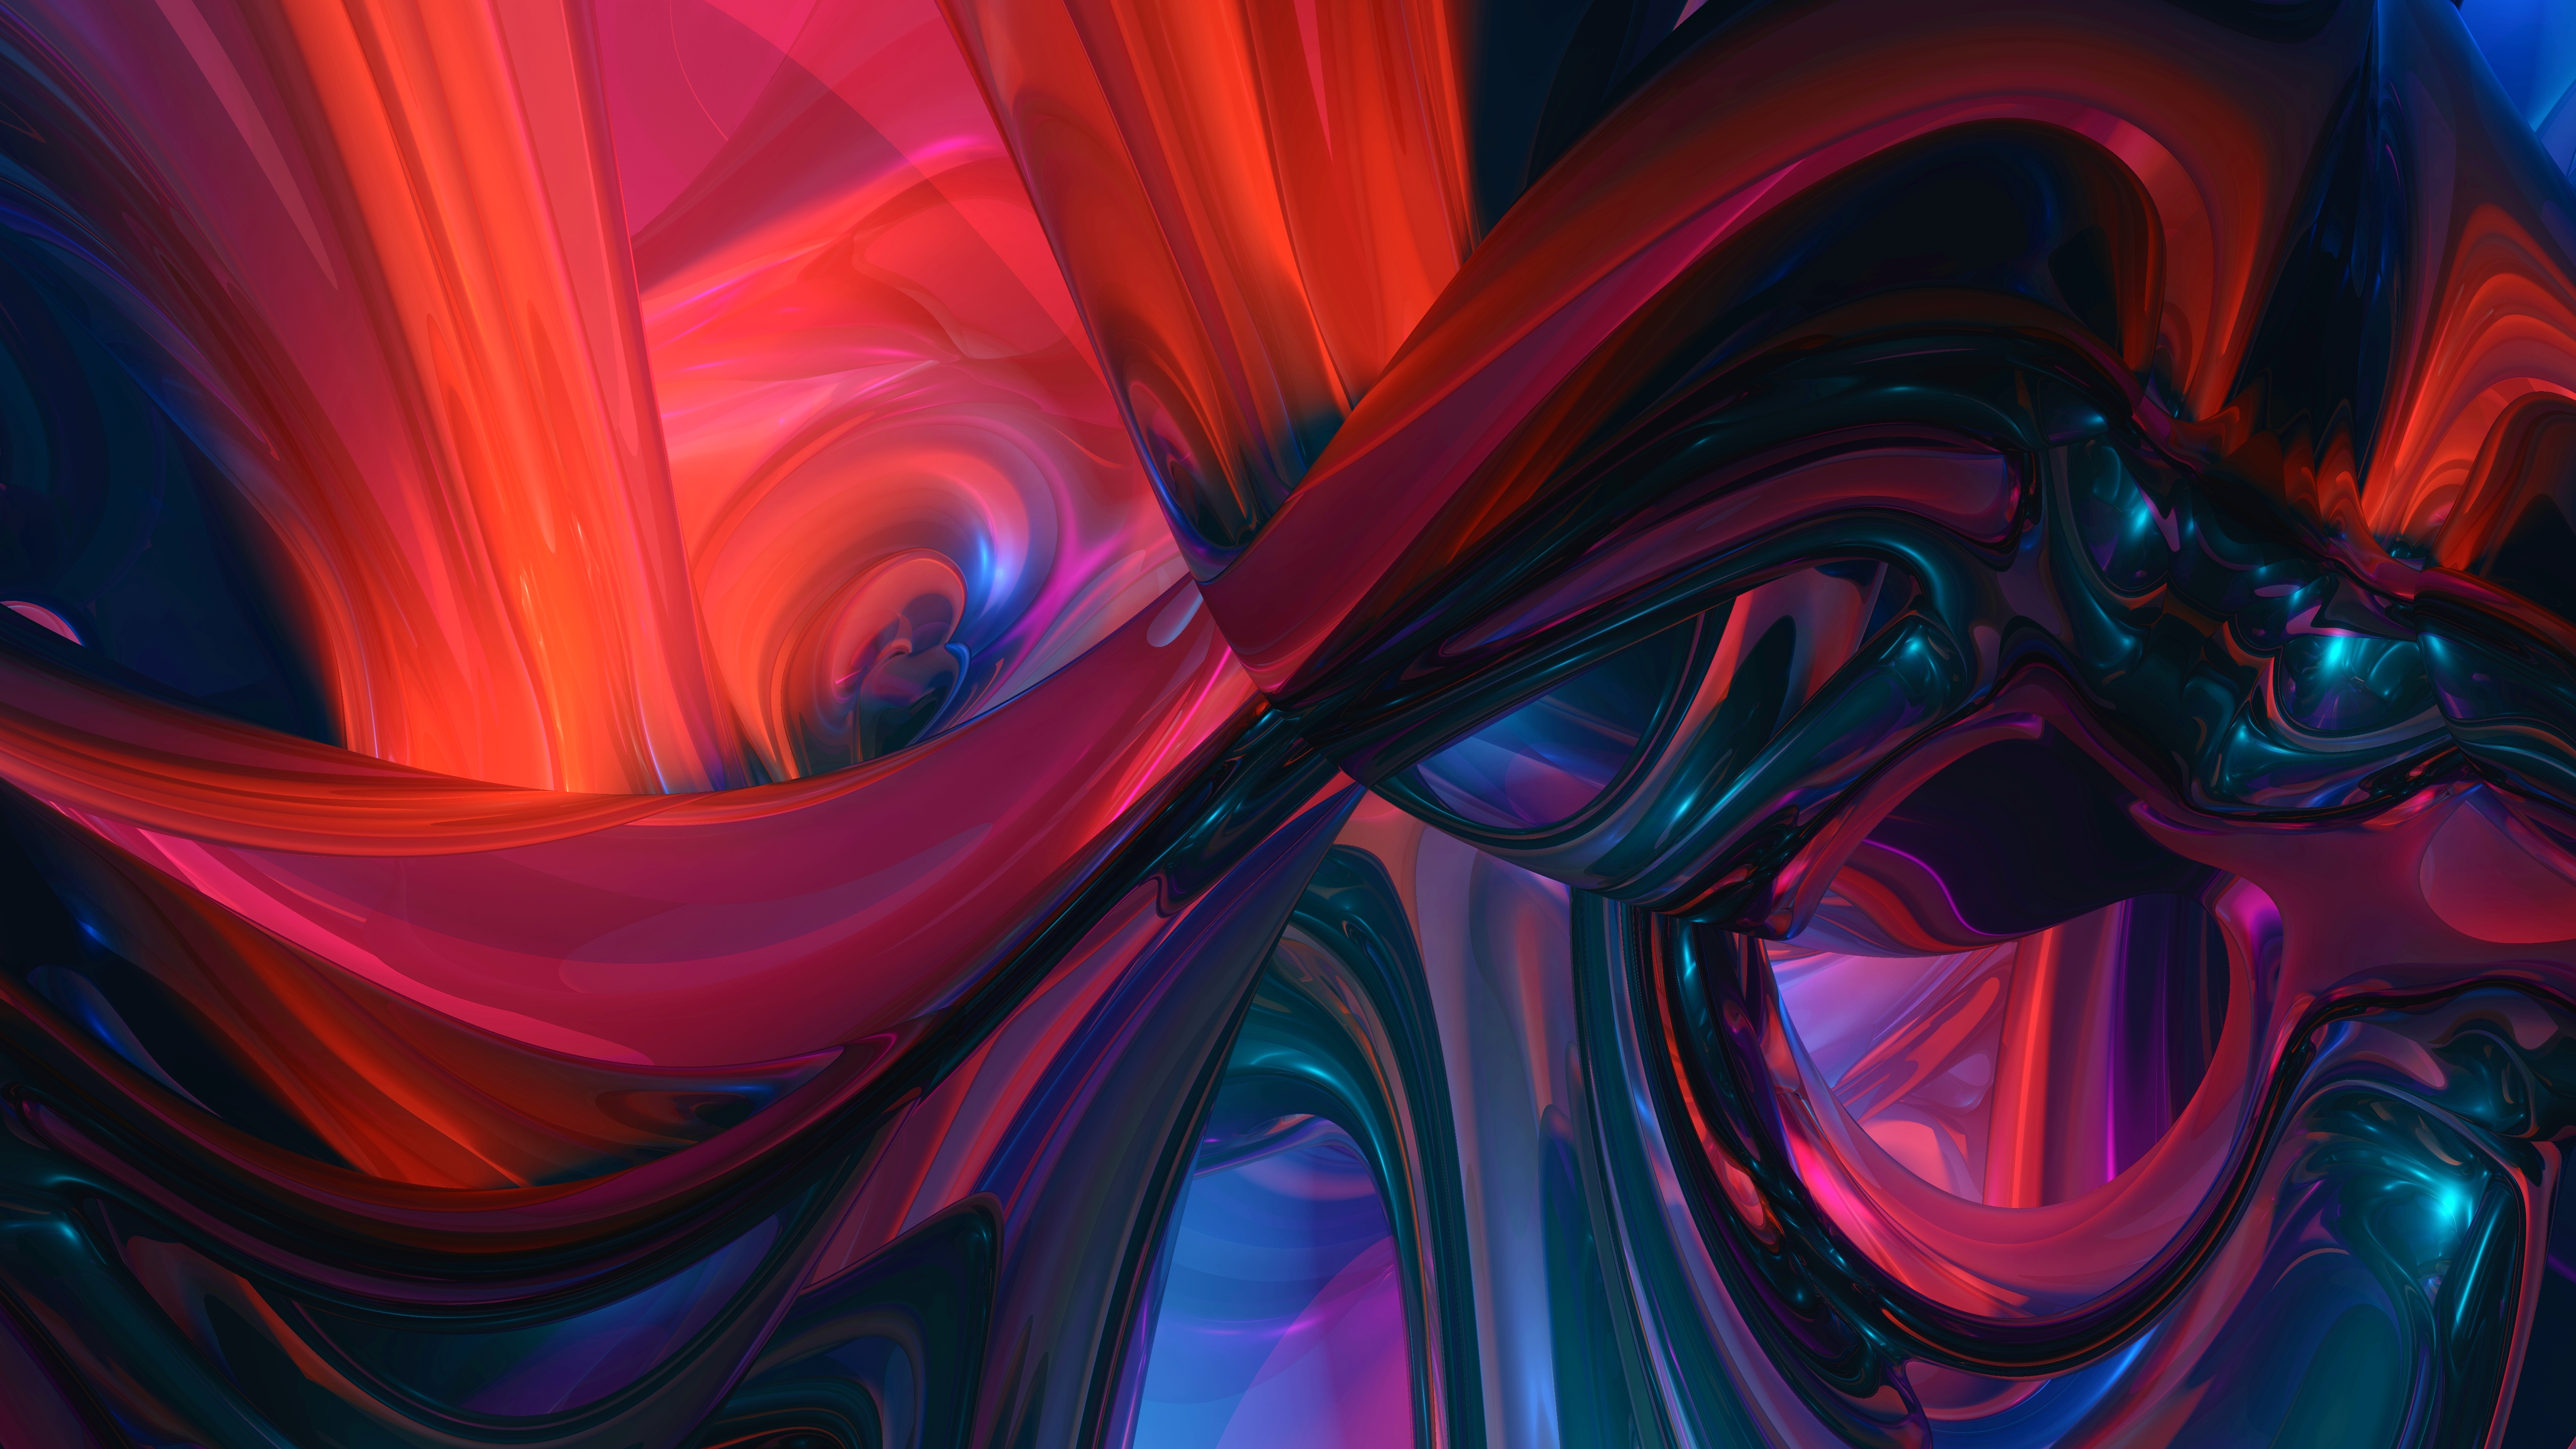 UHD wallpaper multicolored, confused, abstract, fractal